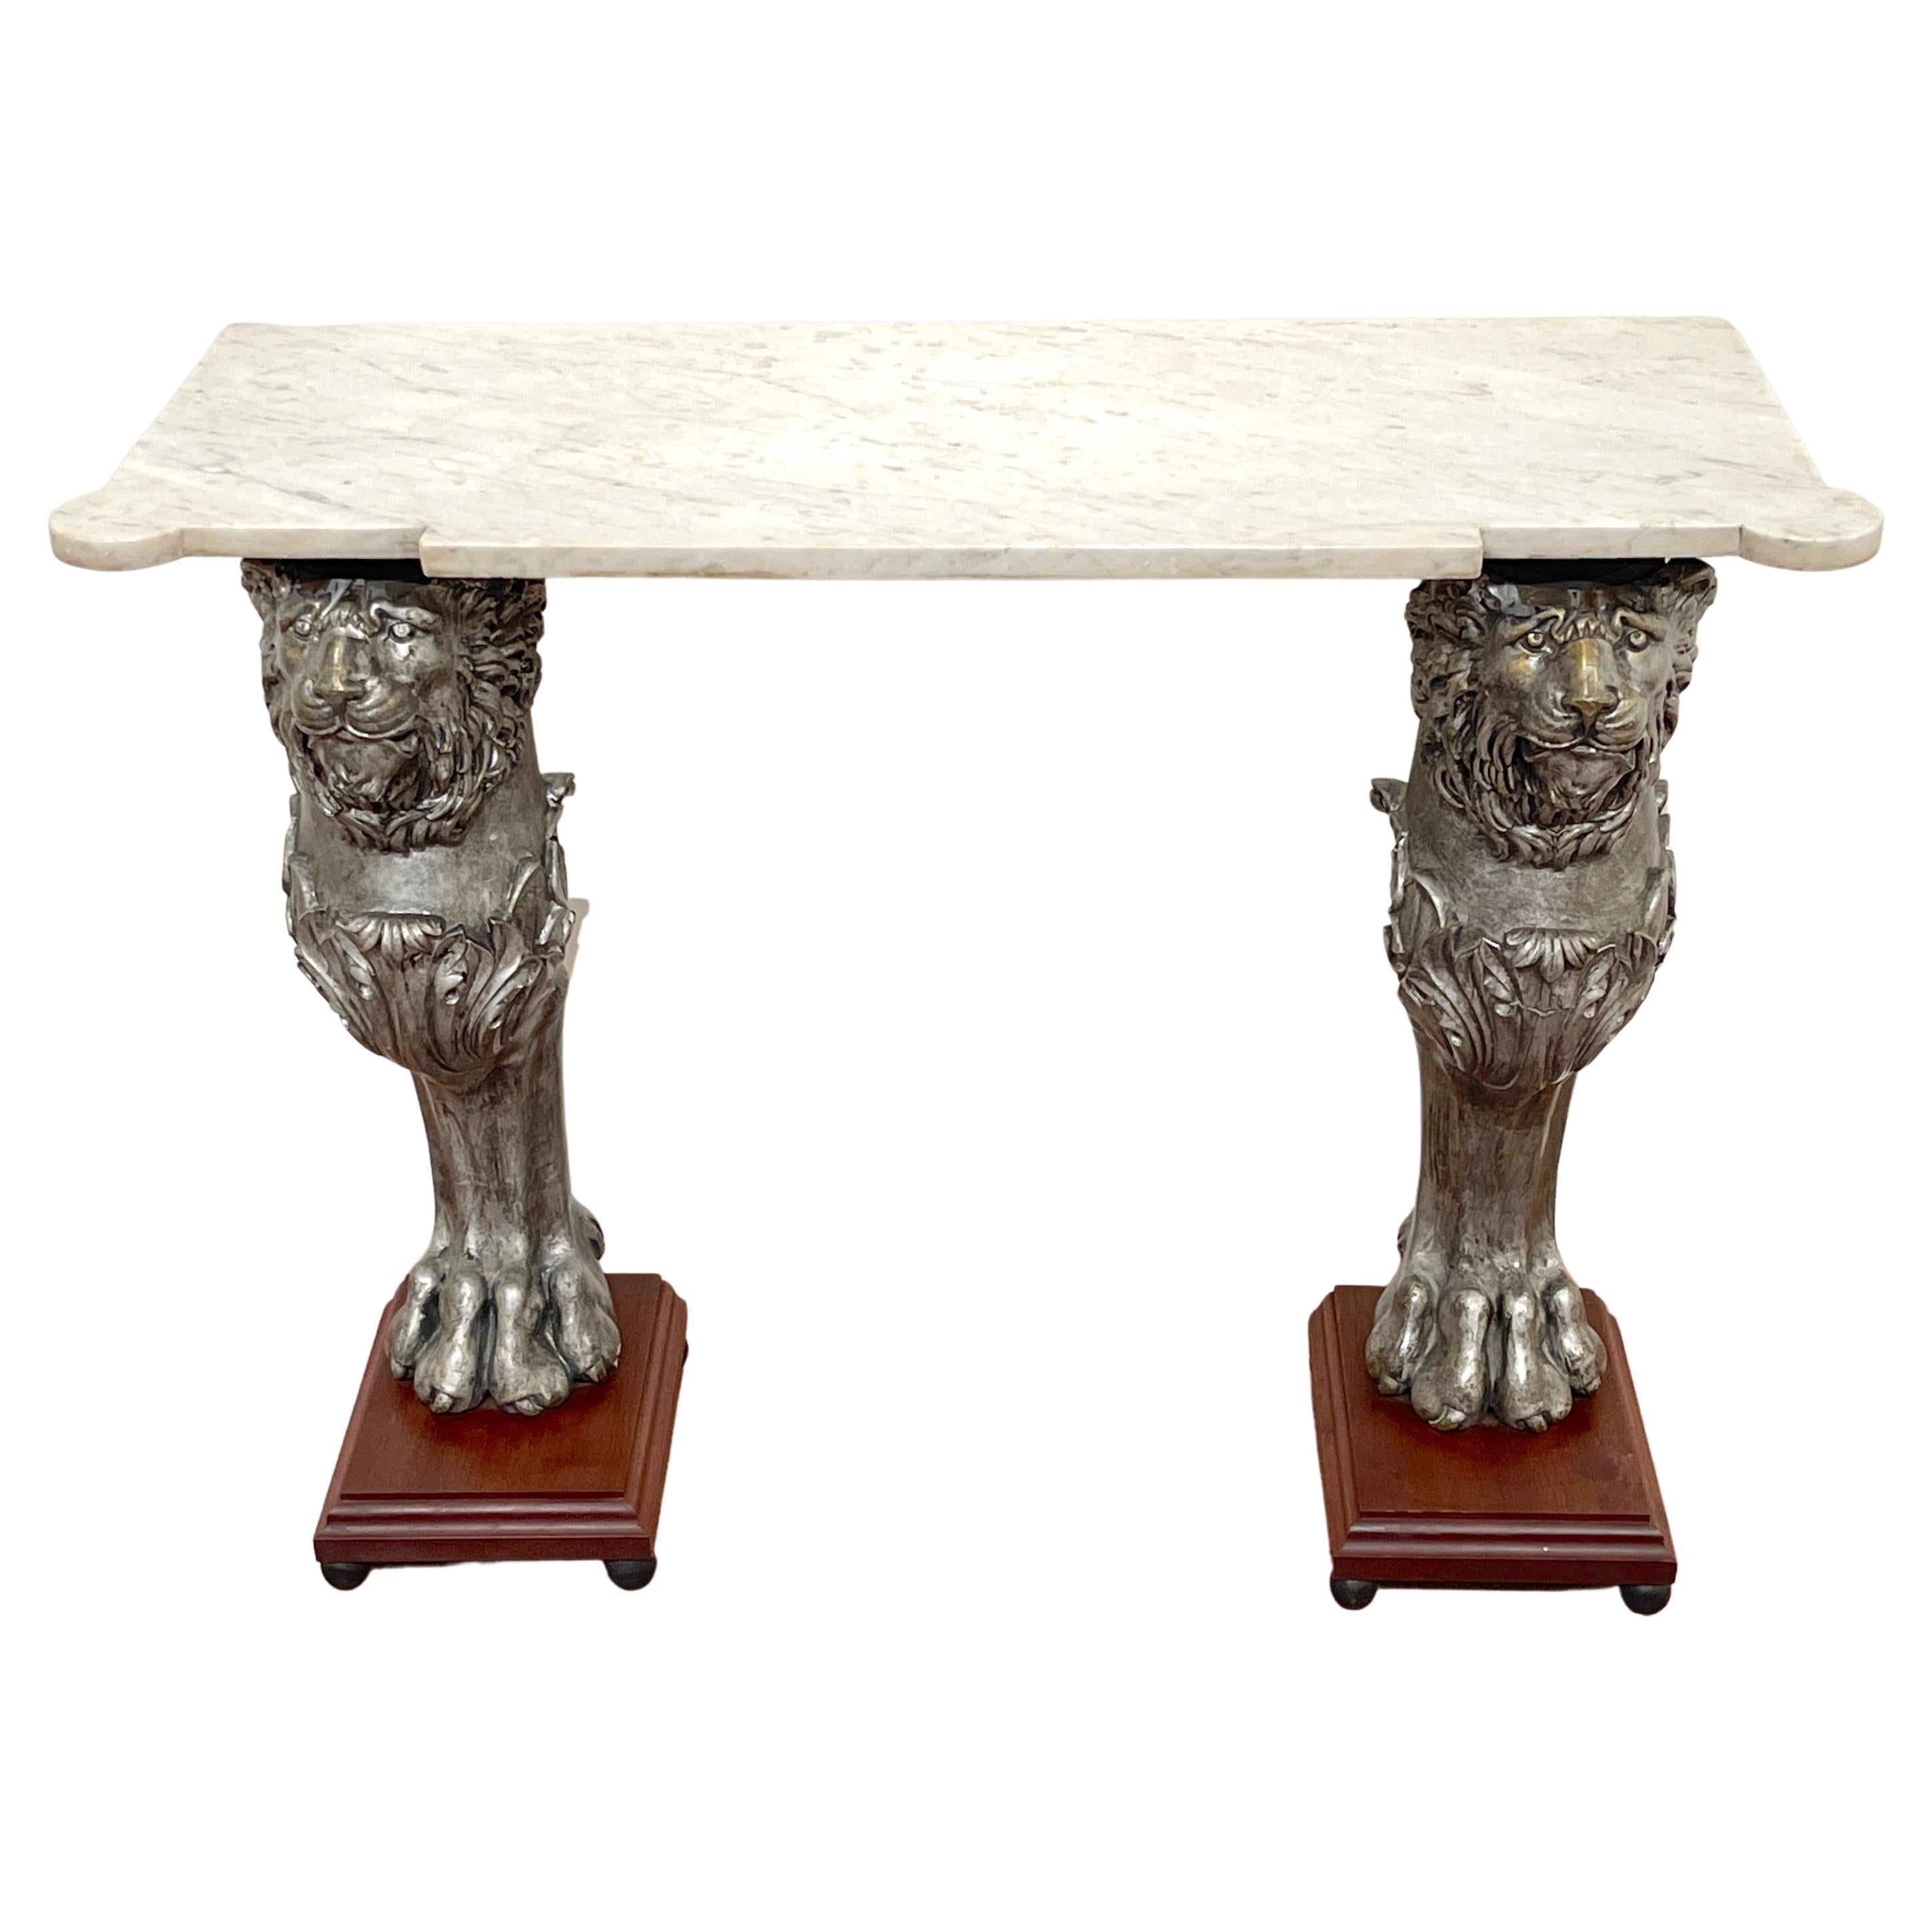 English Regency Style Marble Top Zinc Lion Caryatid Console Table For Sale